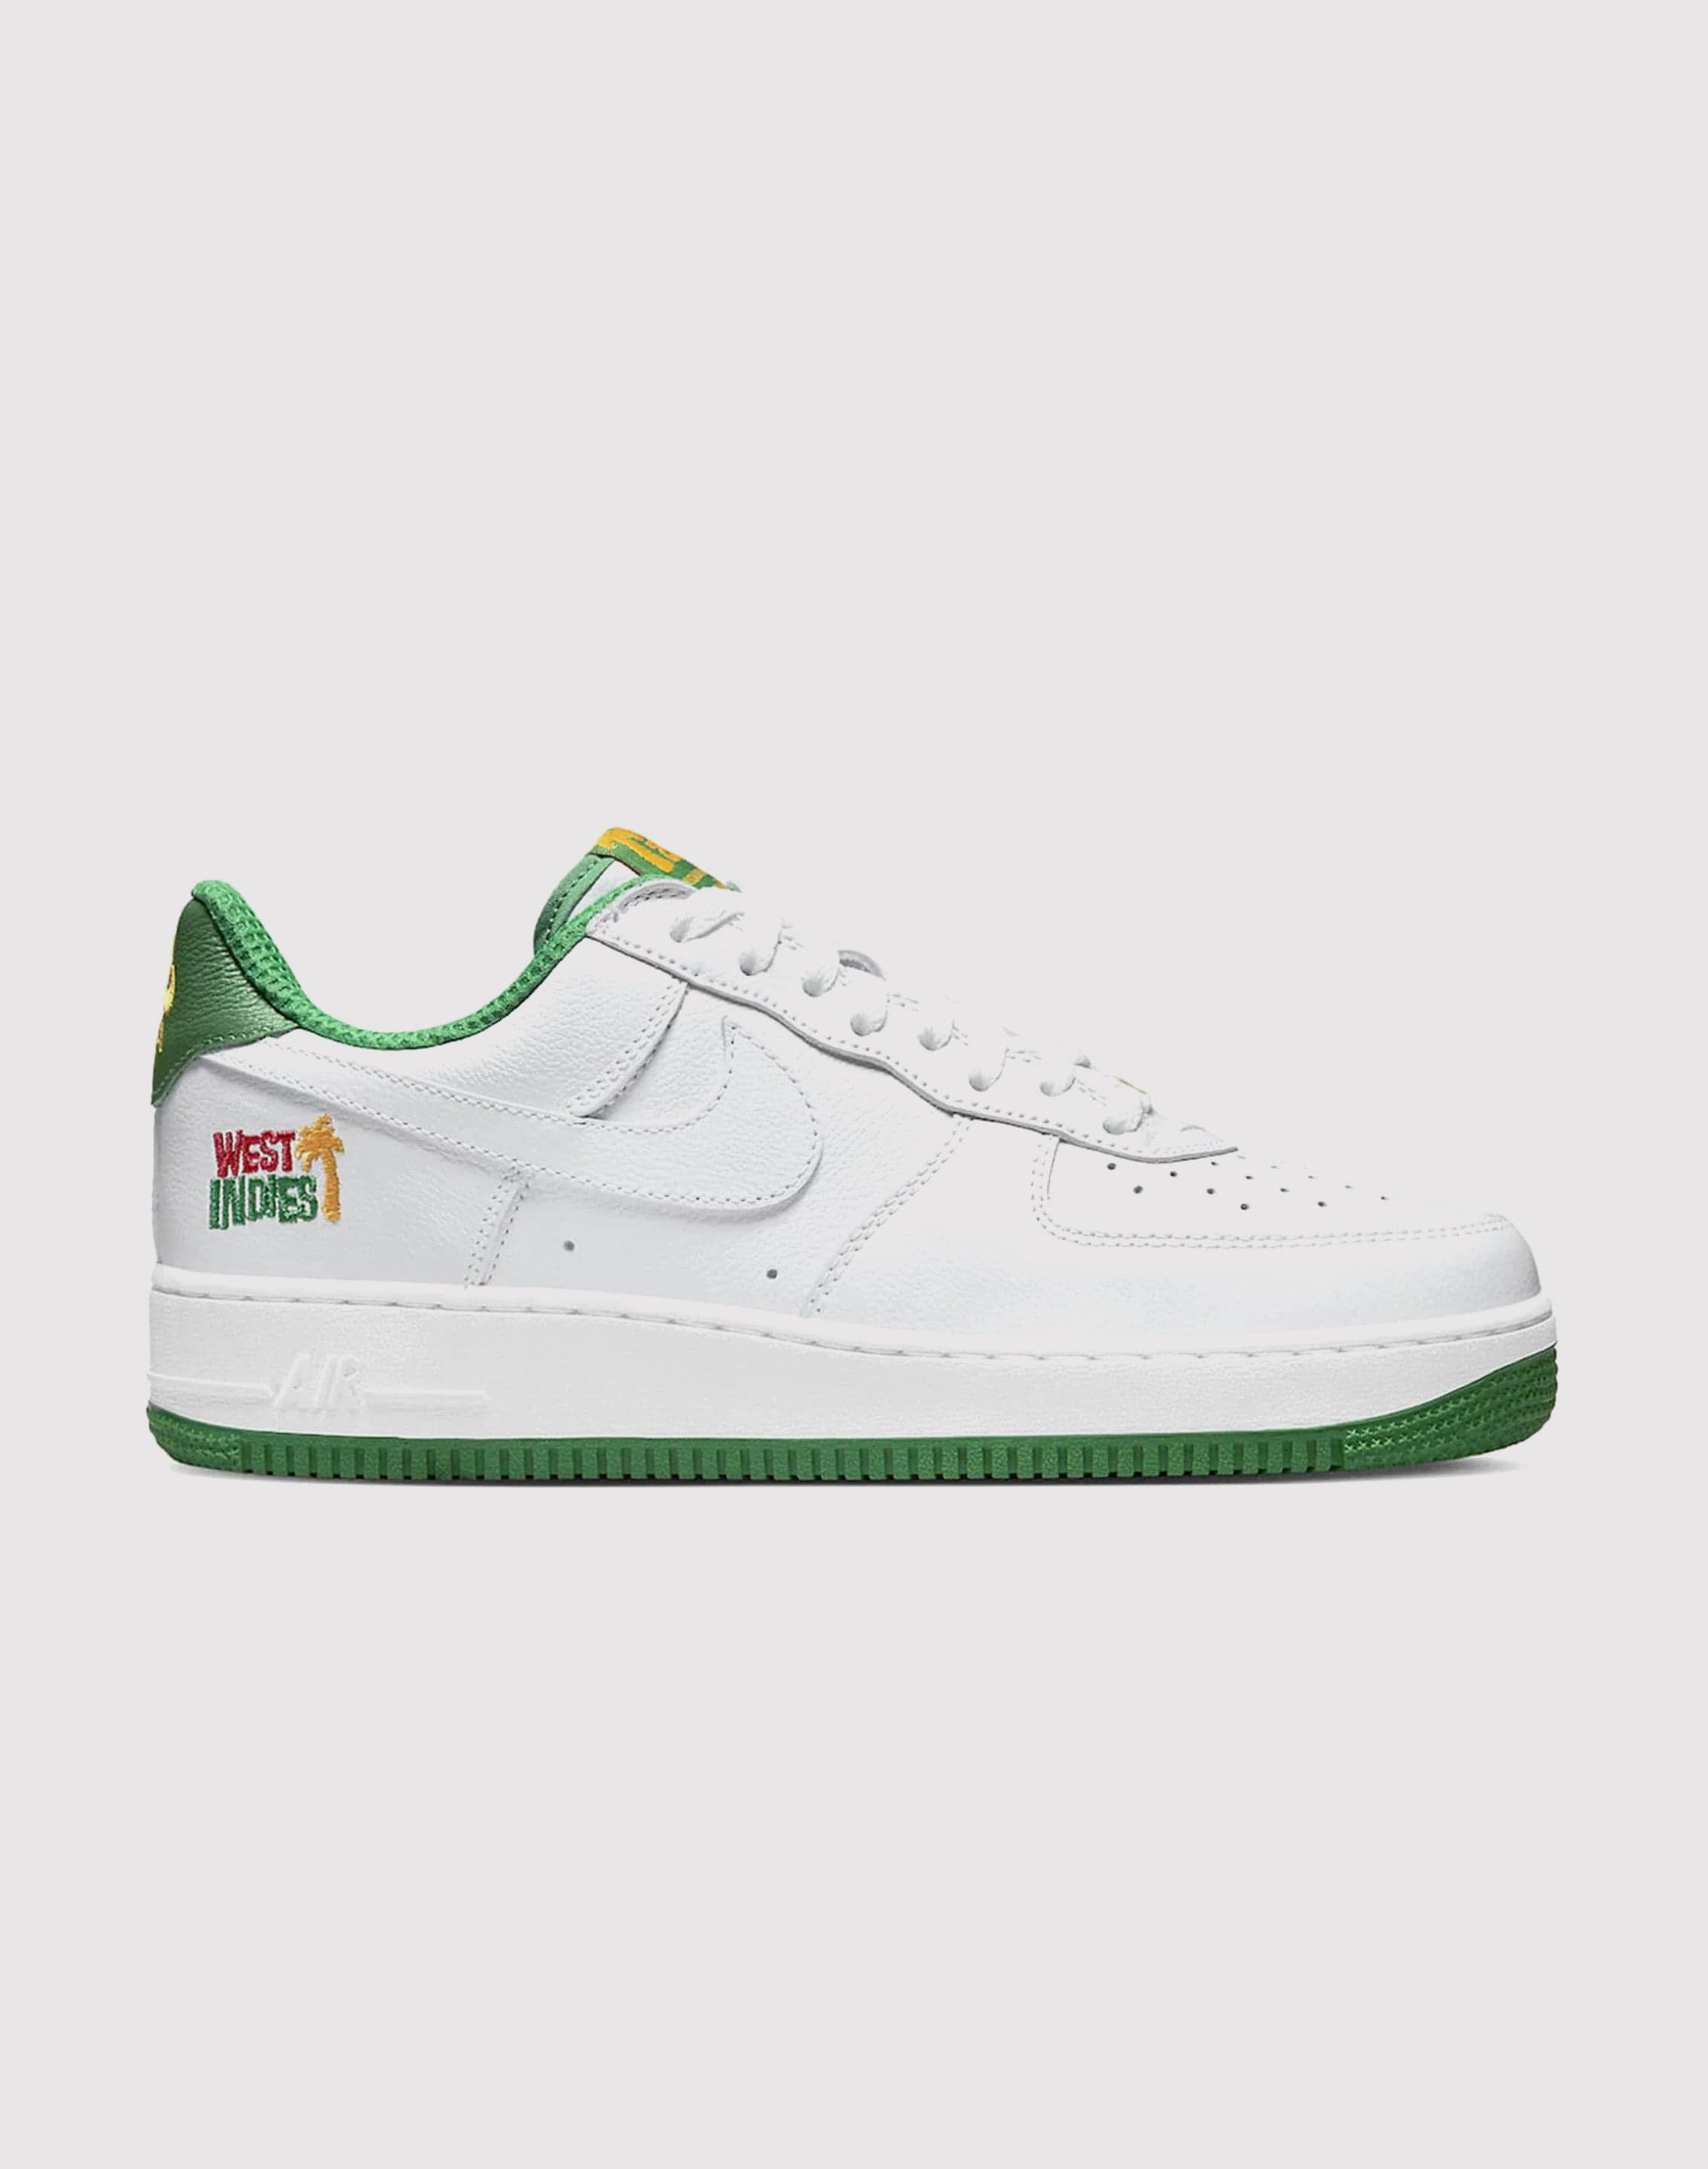 Nike Air Force 1 Low Retro Qs 'West Indies'